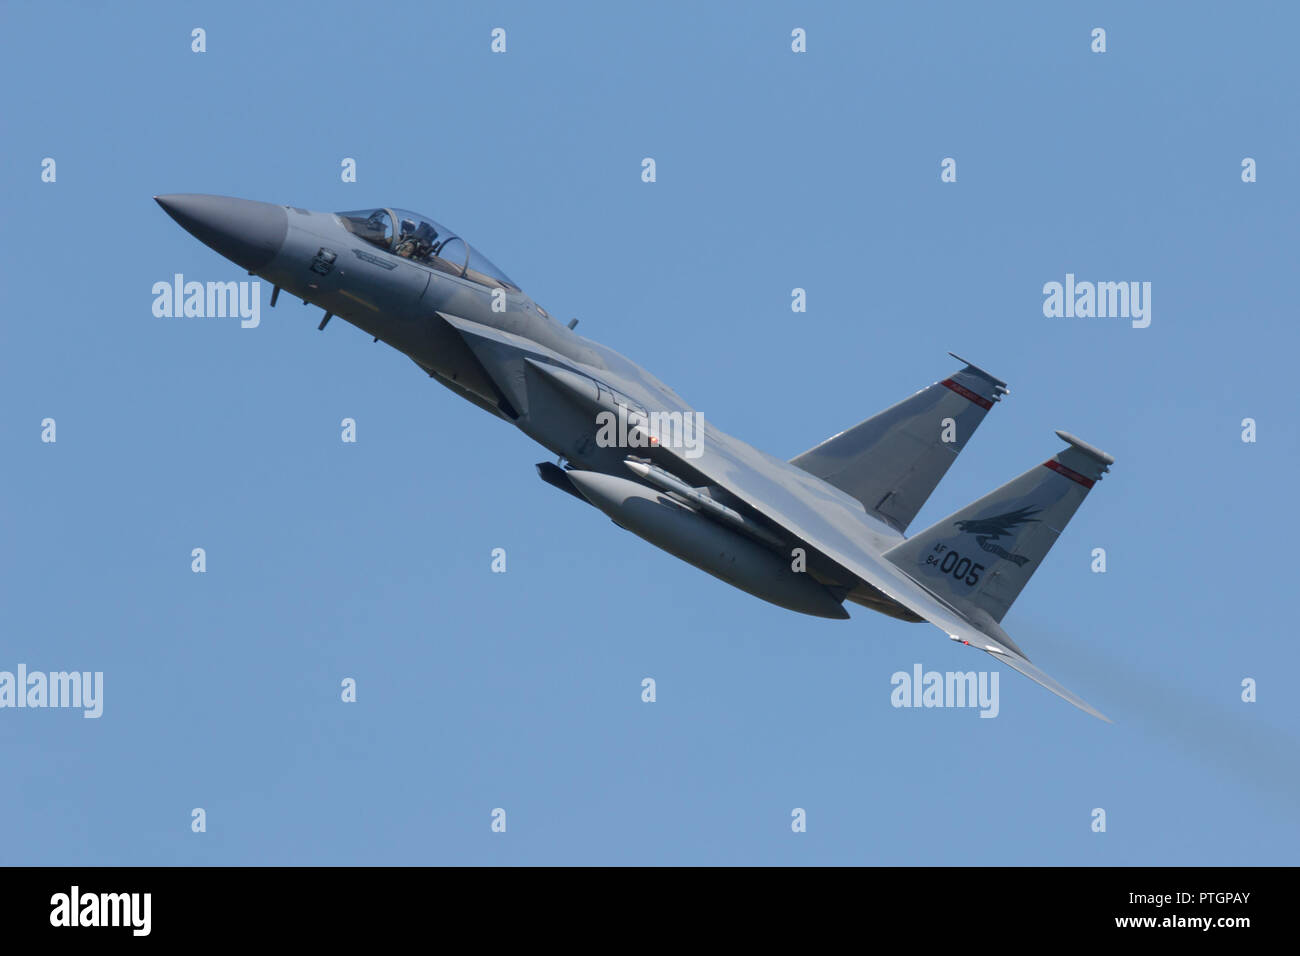 Leeuwarden, Netherlands April 18, 2018: A USAF F-15 of 142 Redhawks Fighter Wing during the Frisian Flag exercise Stock Photo